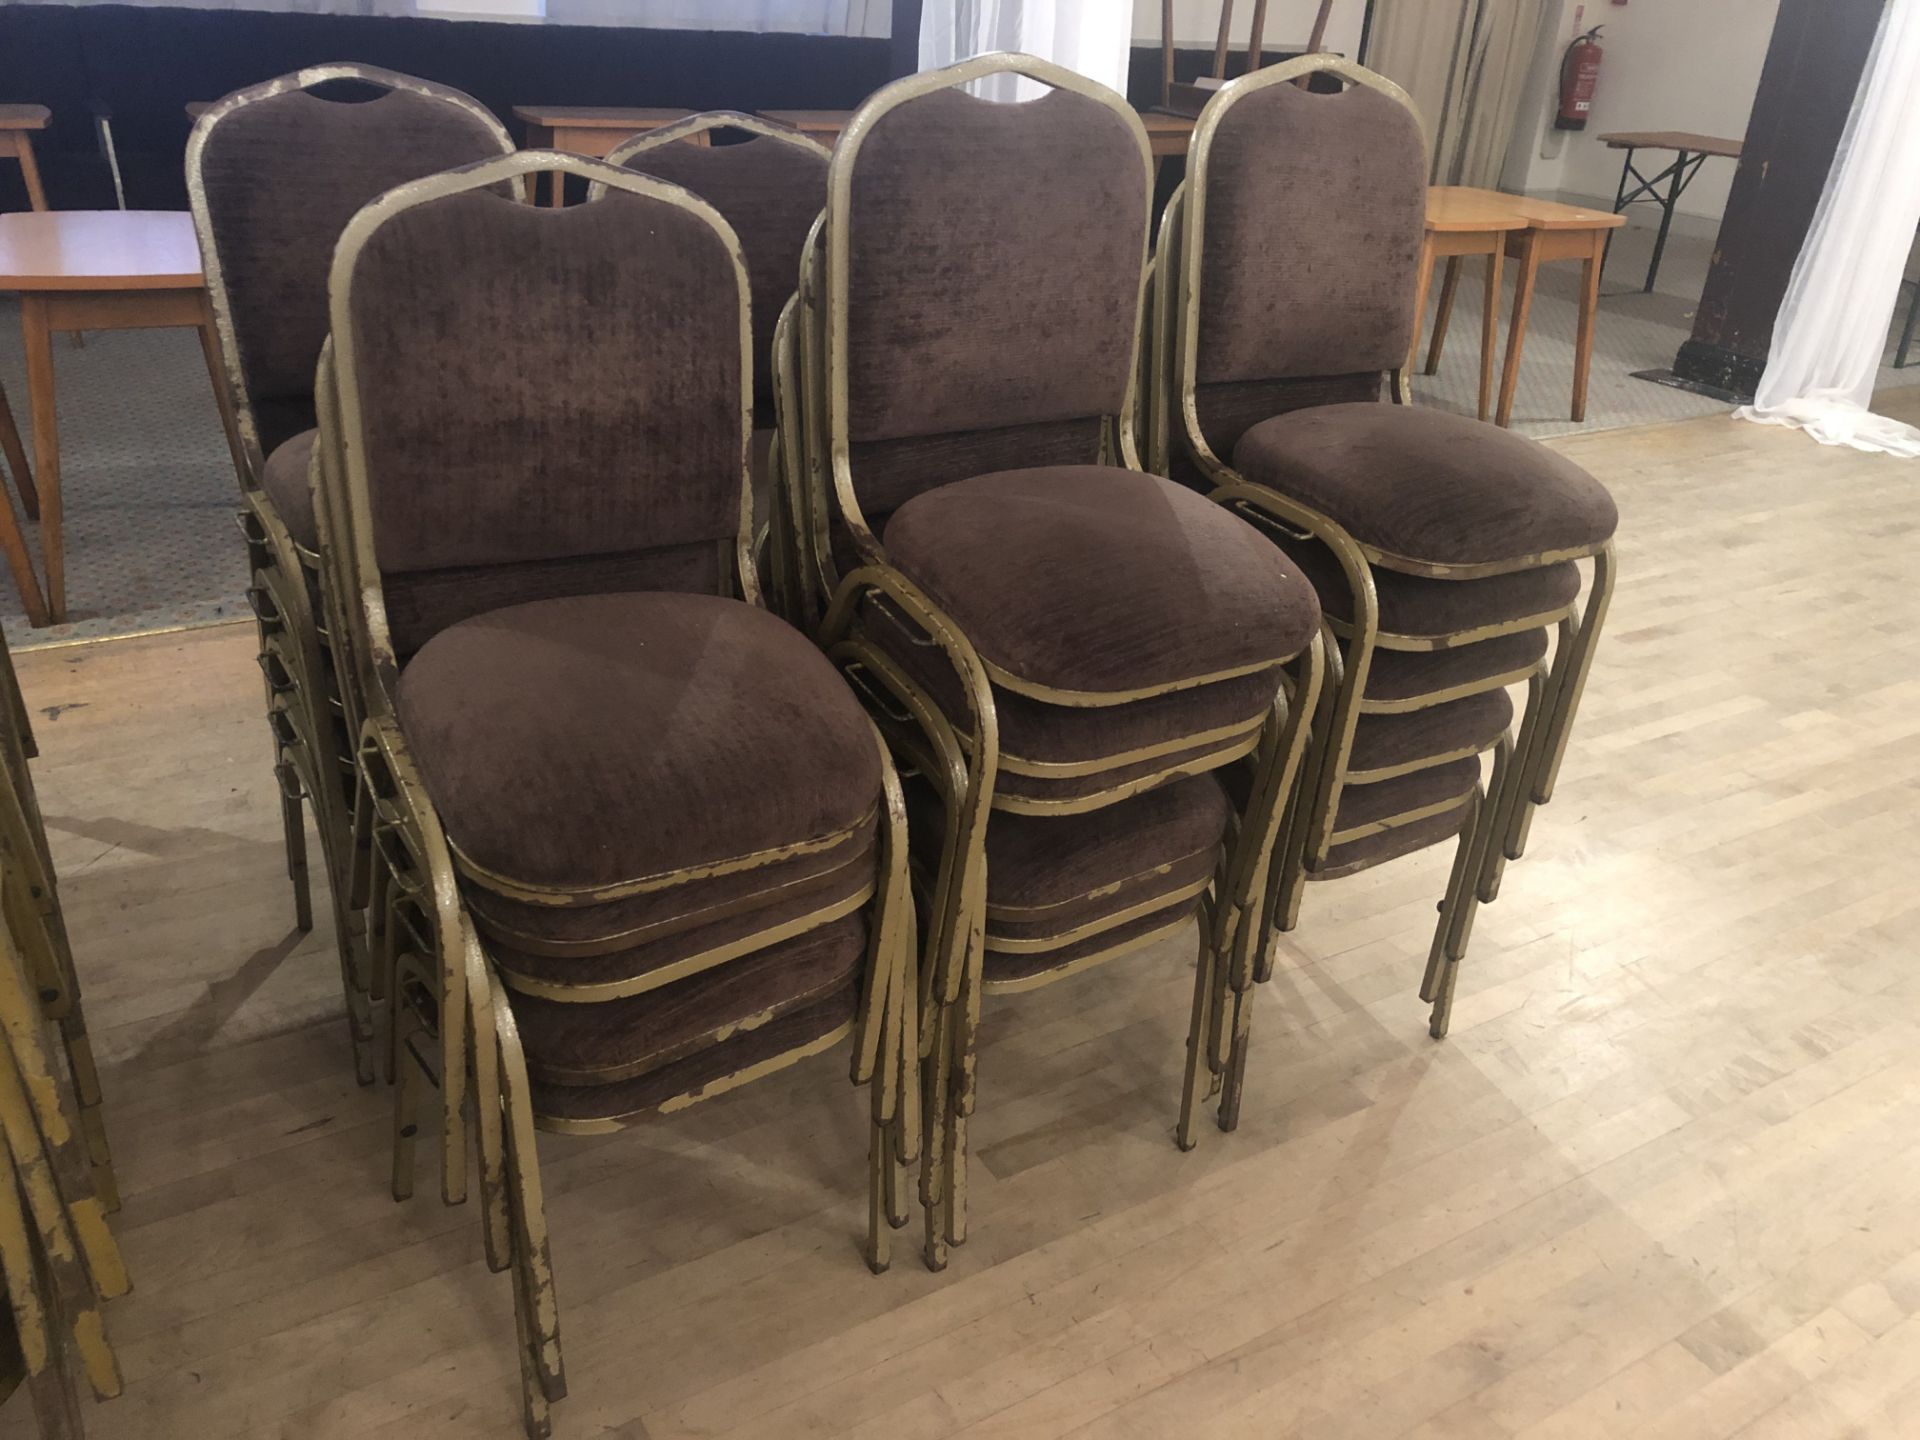 32 x Fabric Banquet Chairs in Brown